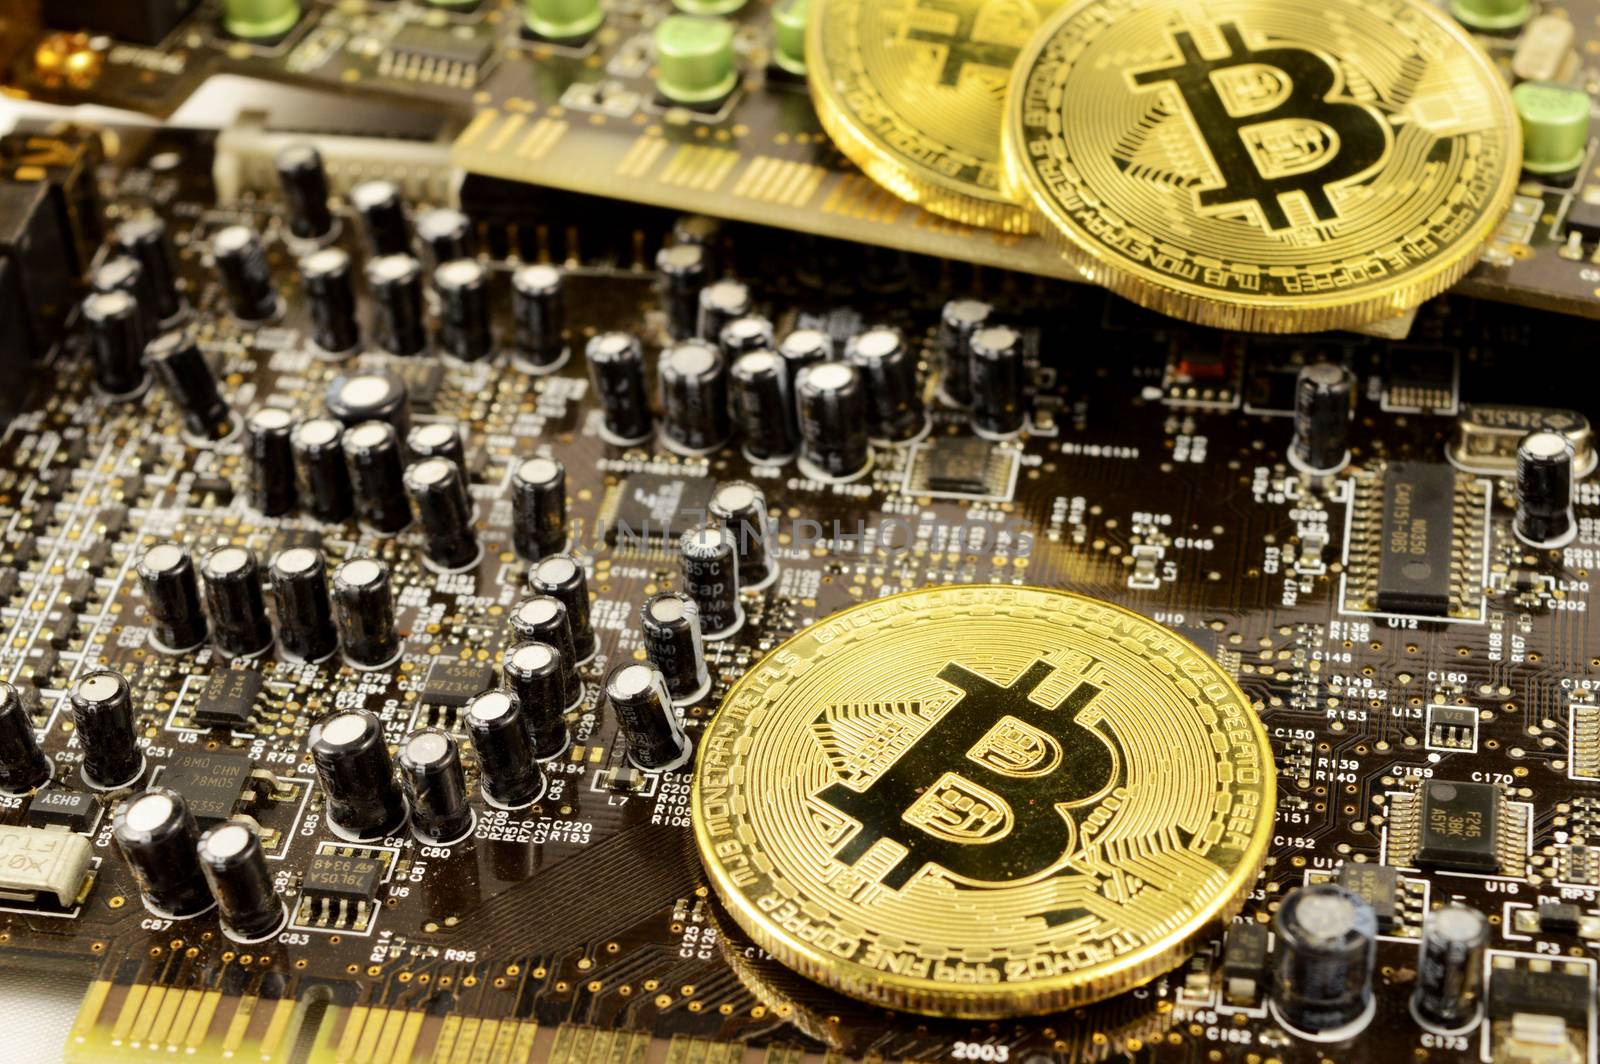 Closeup view of Bitcoins resting on top of a circuit board for showing the digital cryptocurrency details.